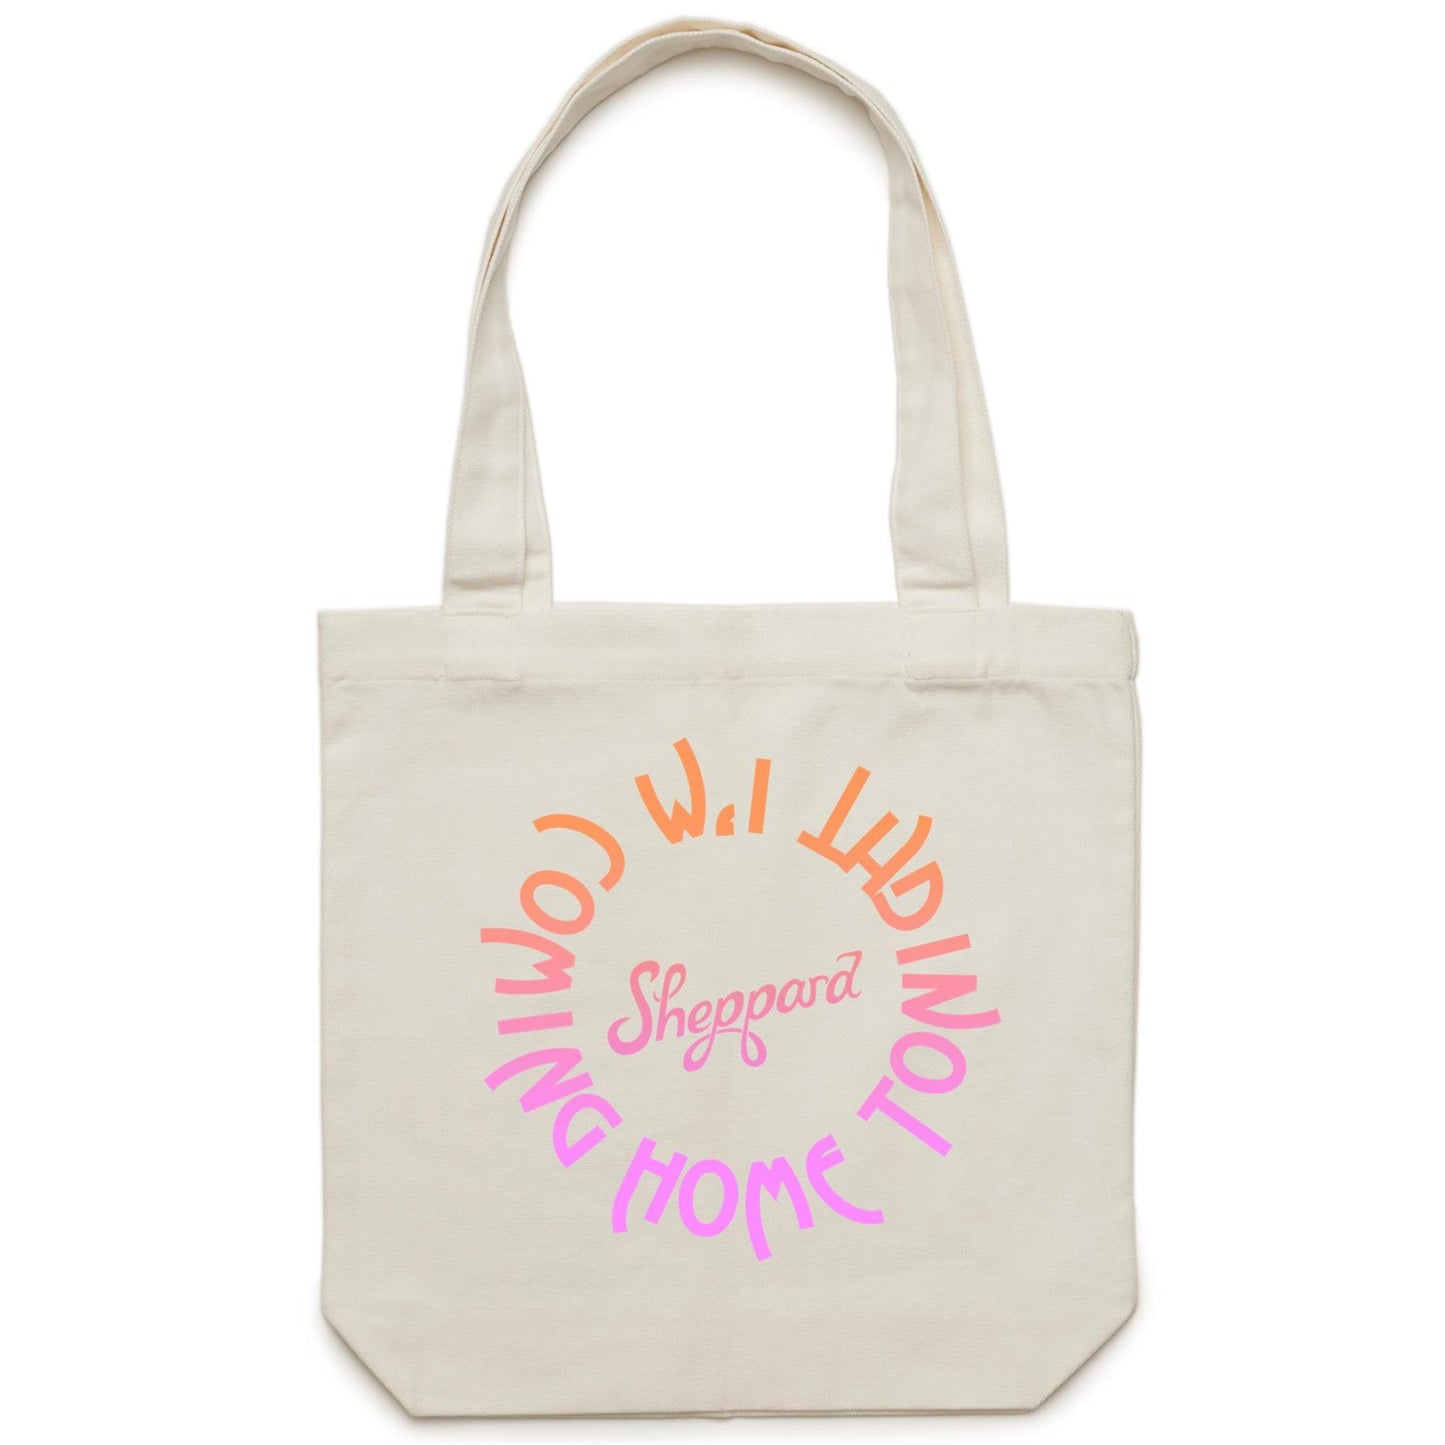 NEW! Coming Home - Canvas Tote Bag